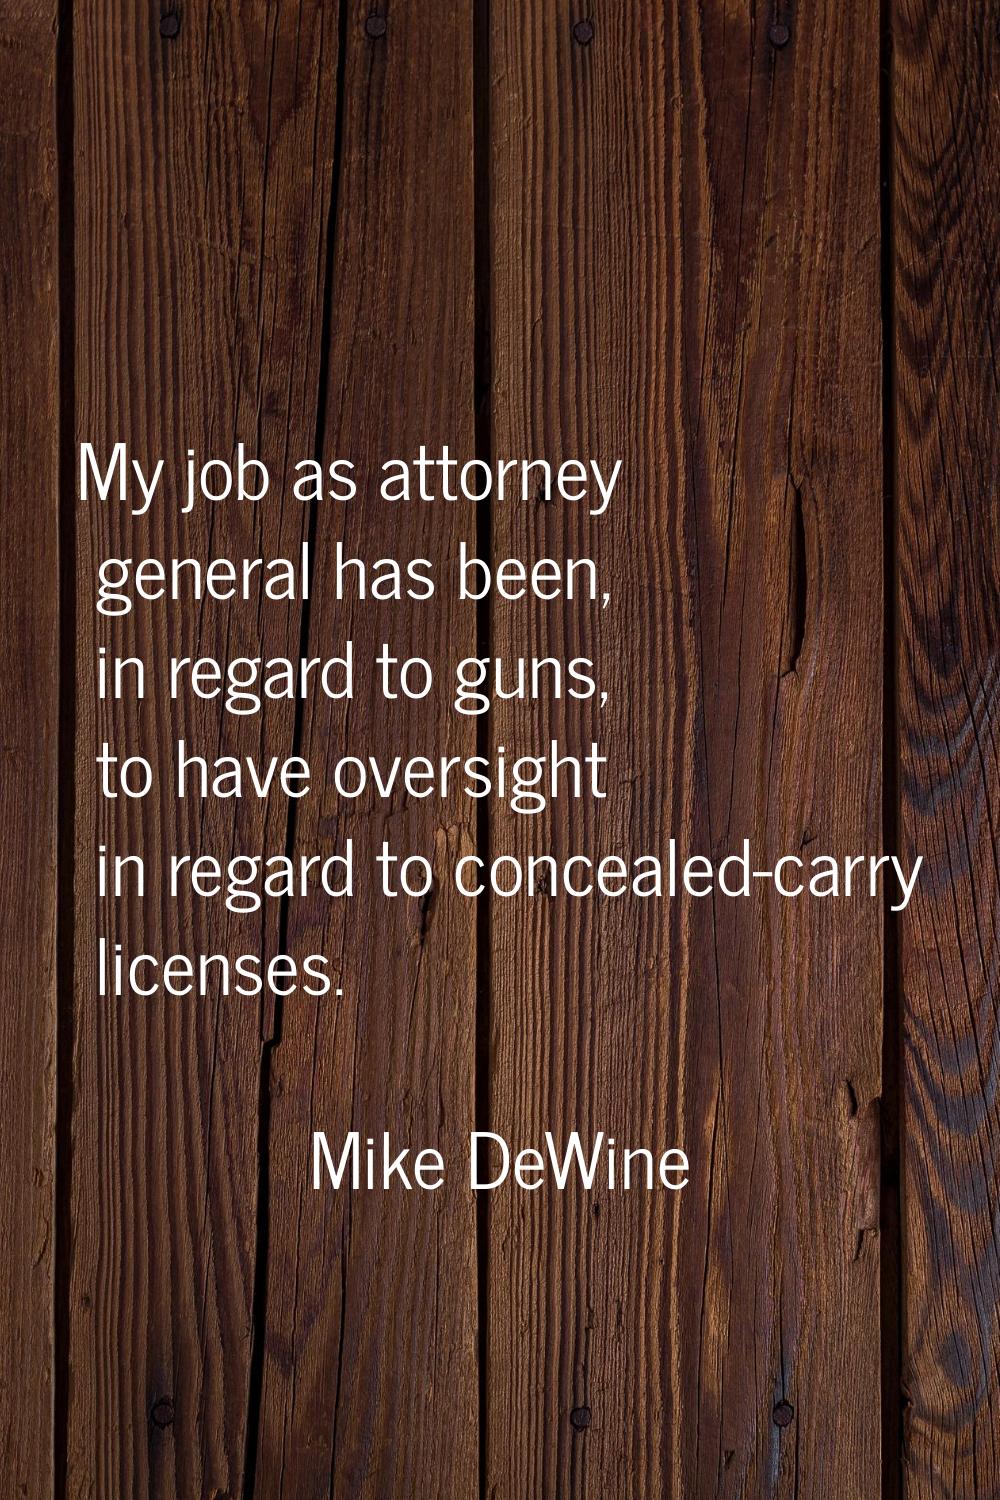 My job as attorney general has been, in regard to guns, to have oversight in regard to concealed-ca